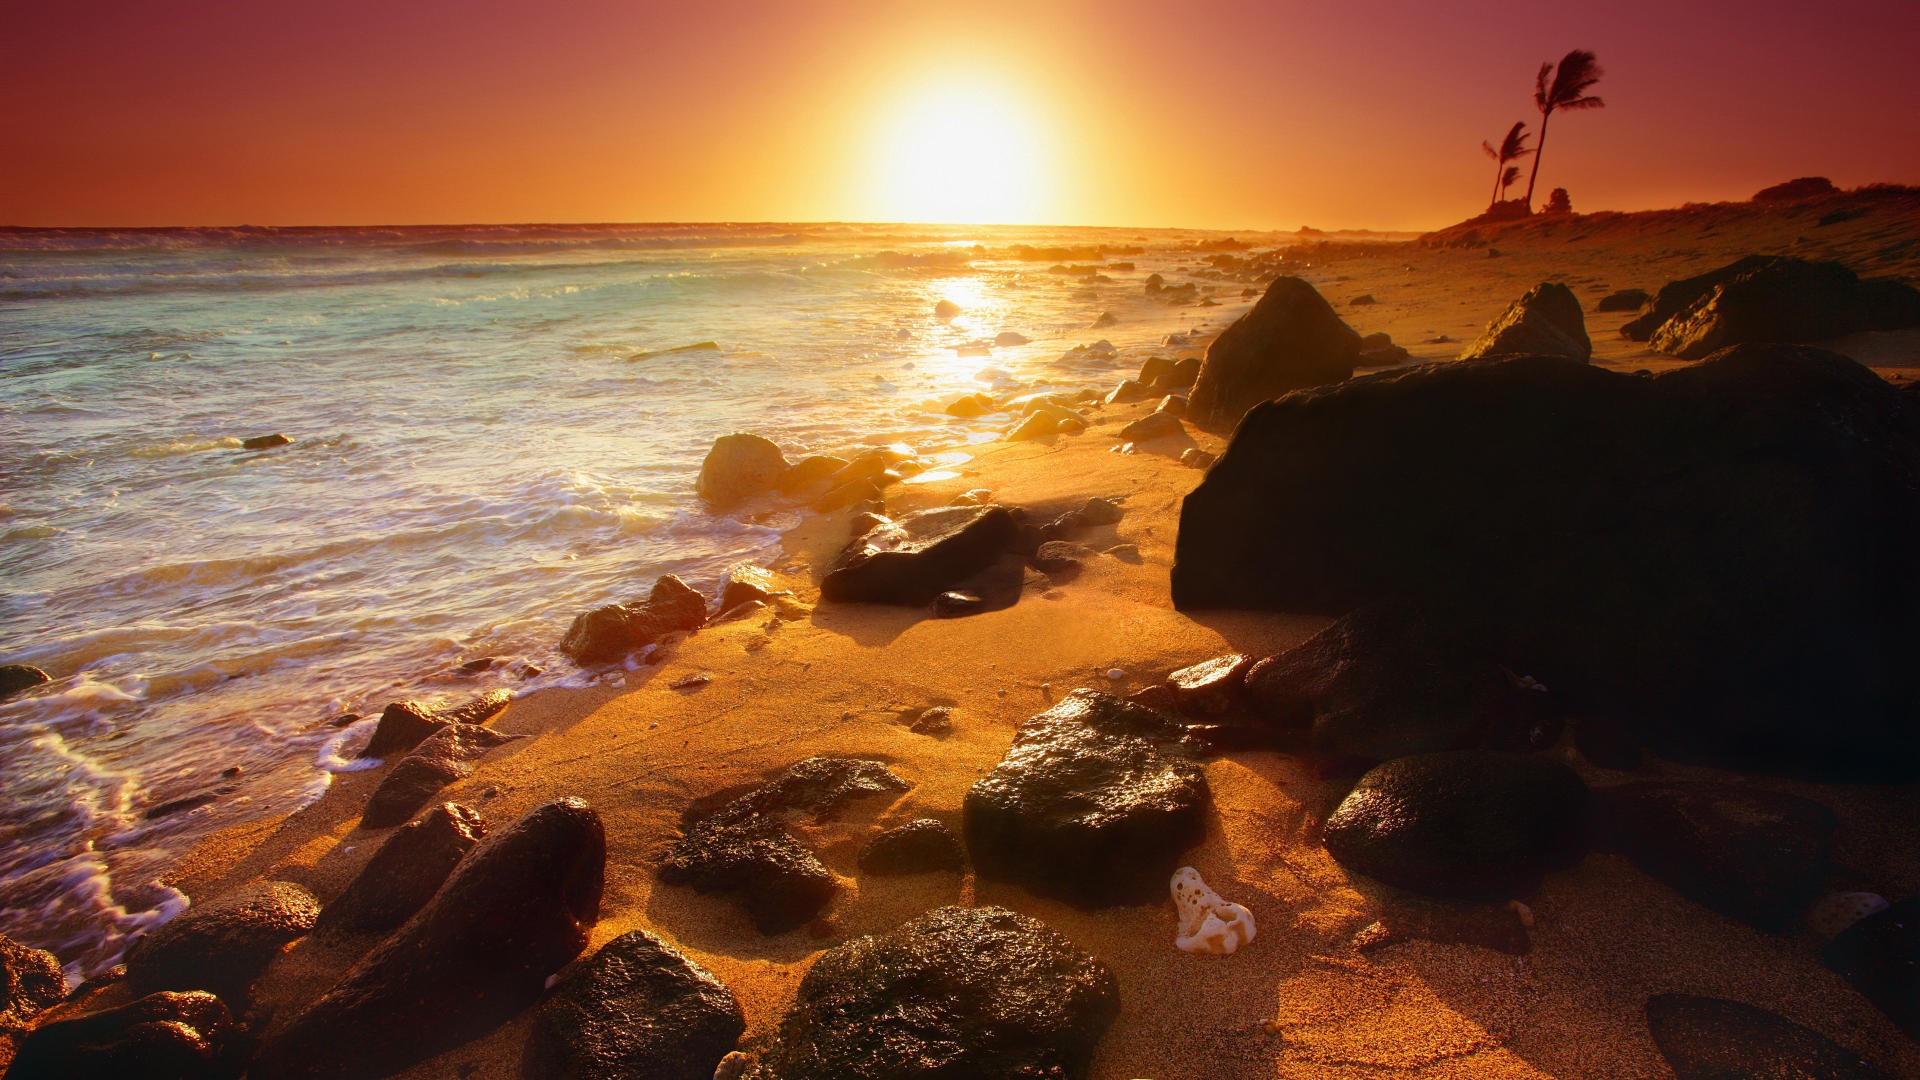 Image: http://www.desktopwallpaperhd.net/wallpapers/16/0/sunset-sunrise-awesome-definition-widescreen-picture-computer-high-gallery-hawaii-shoreline-168224. ...